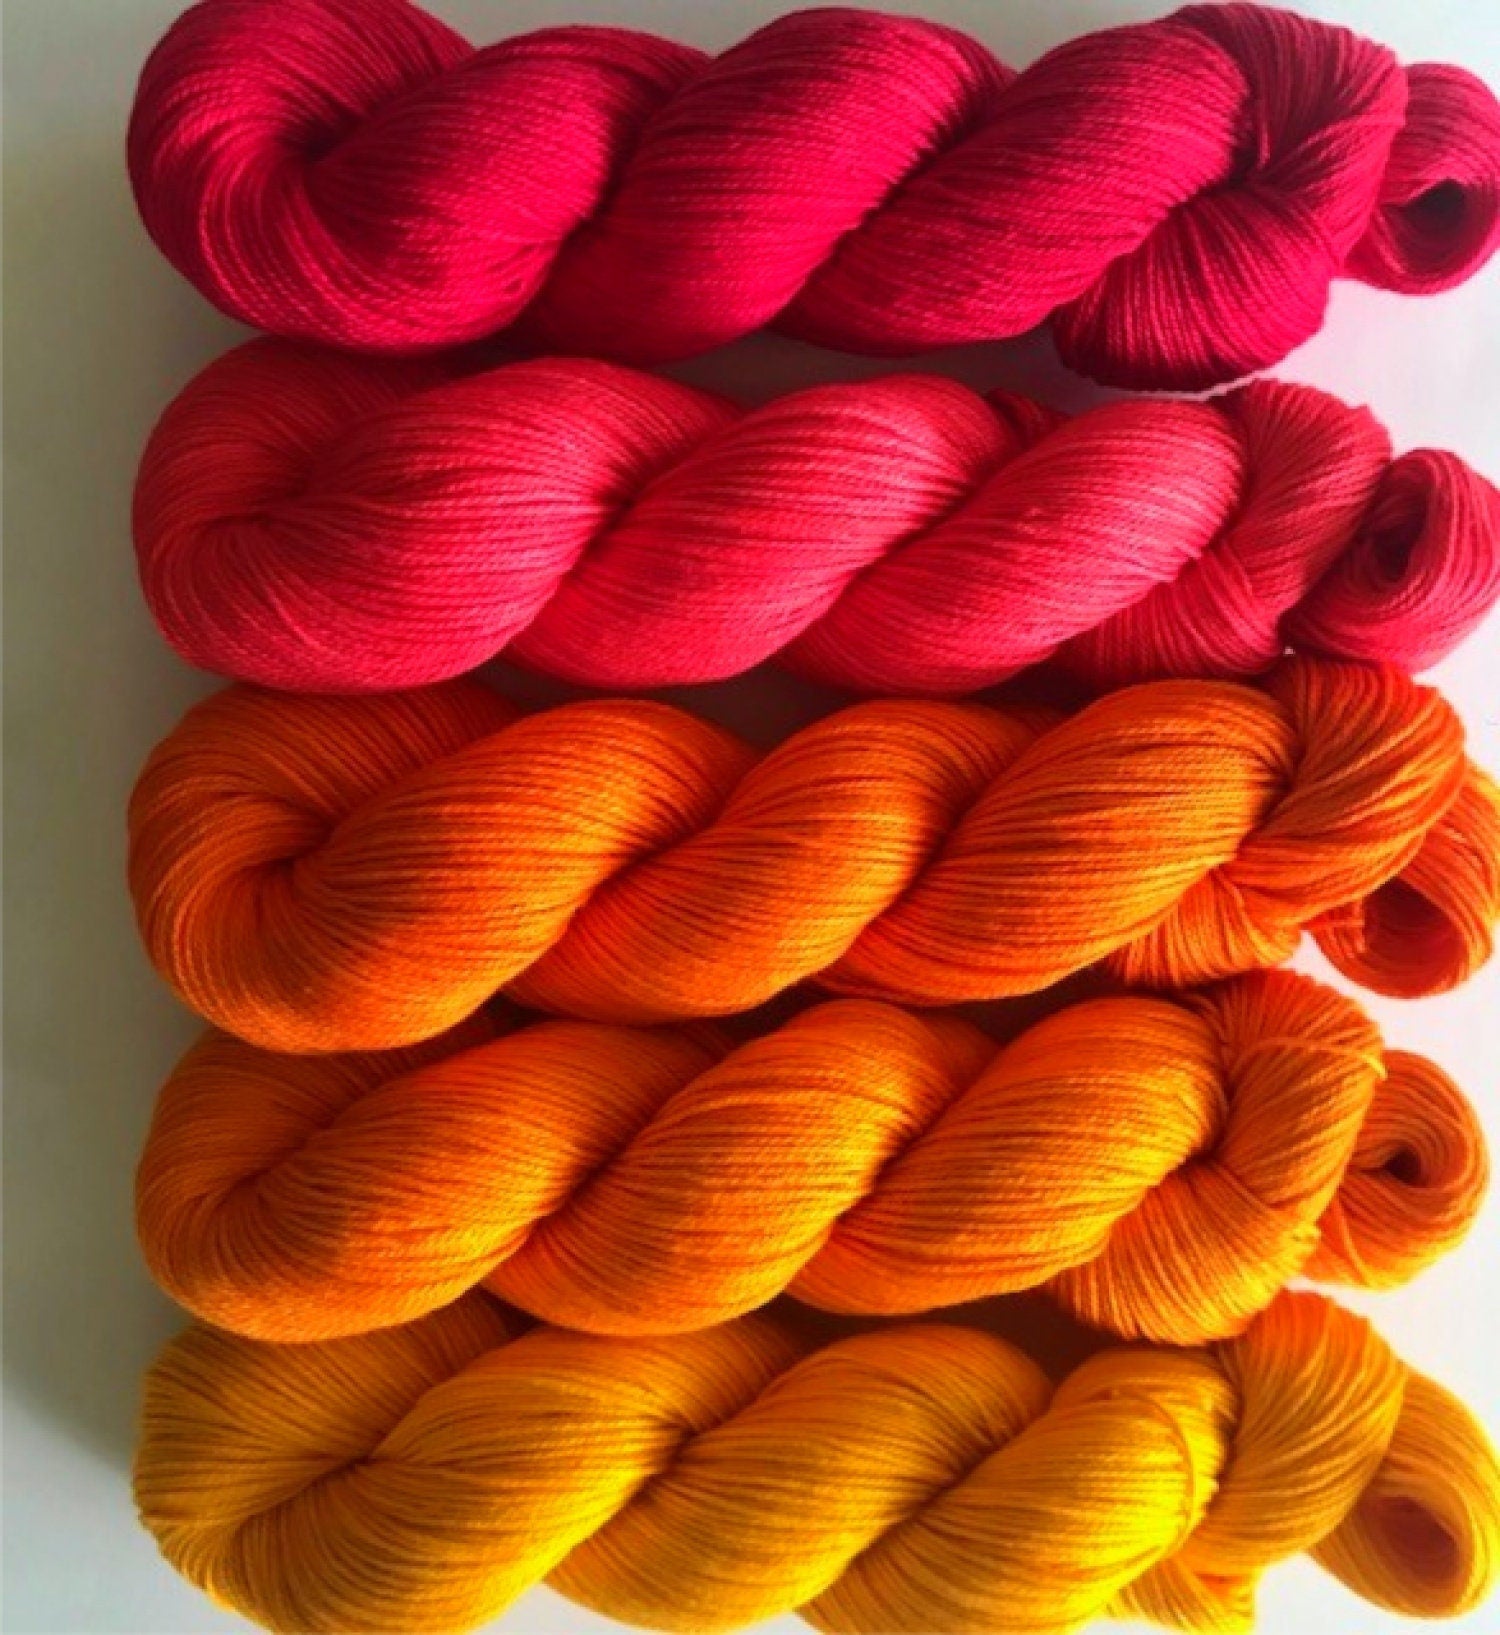 Hand Dyed Vegan Yarn Kits - Fingering / Sock Weight Bamboo Cotton Base - Choose Your Colors - 320 Yds/Hank - 1600 Yds/Kit - Indie Dyed Fiber